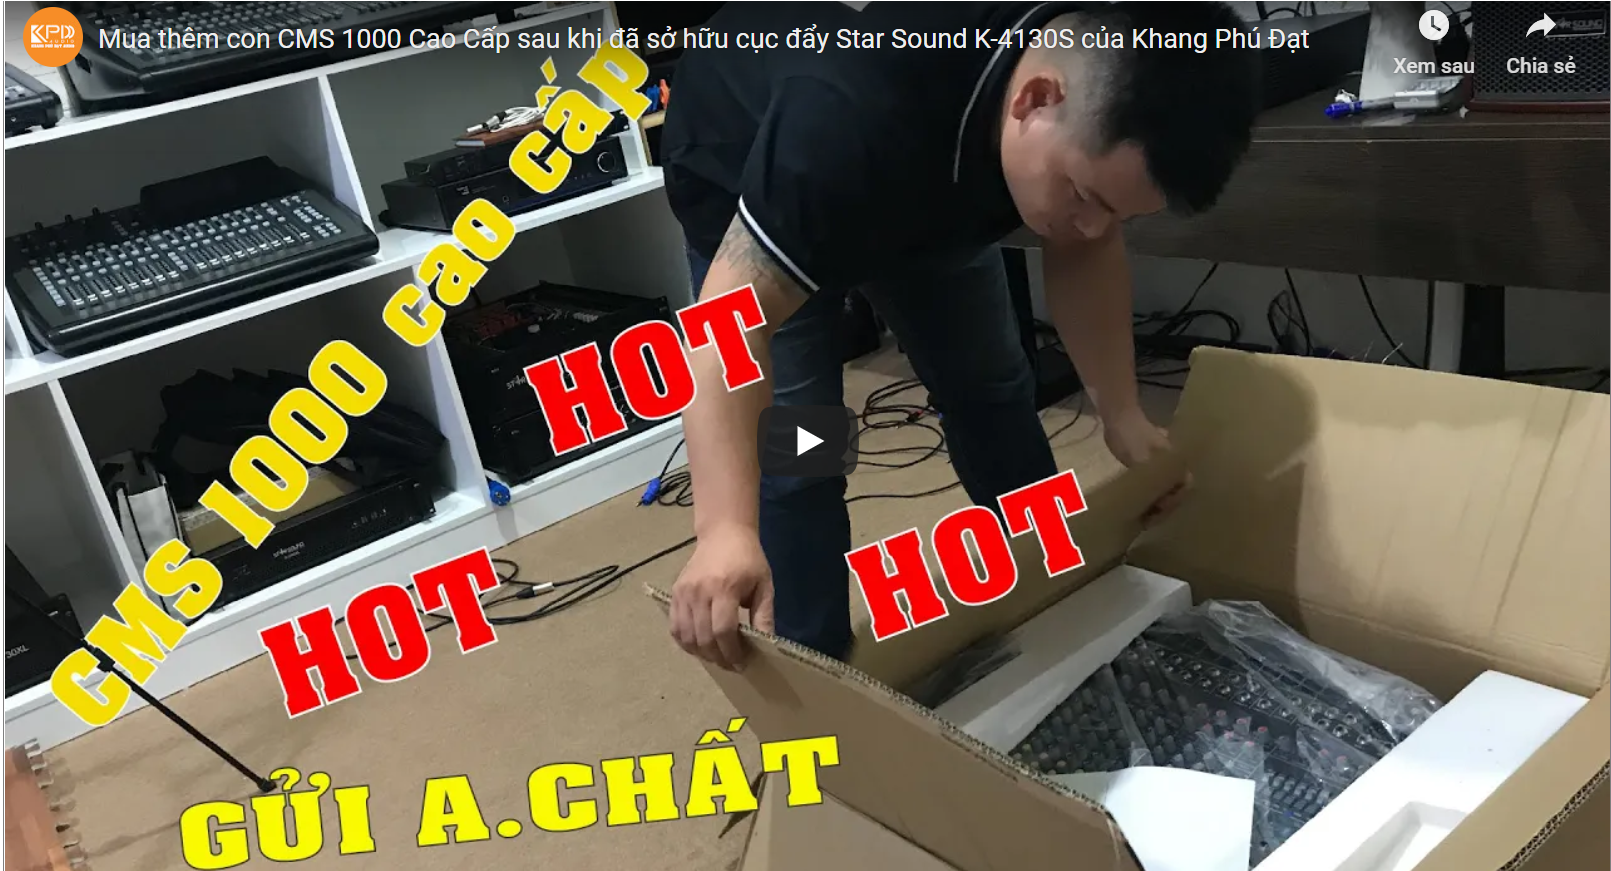 cms-1000-cao-cap-gui-anh-chat